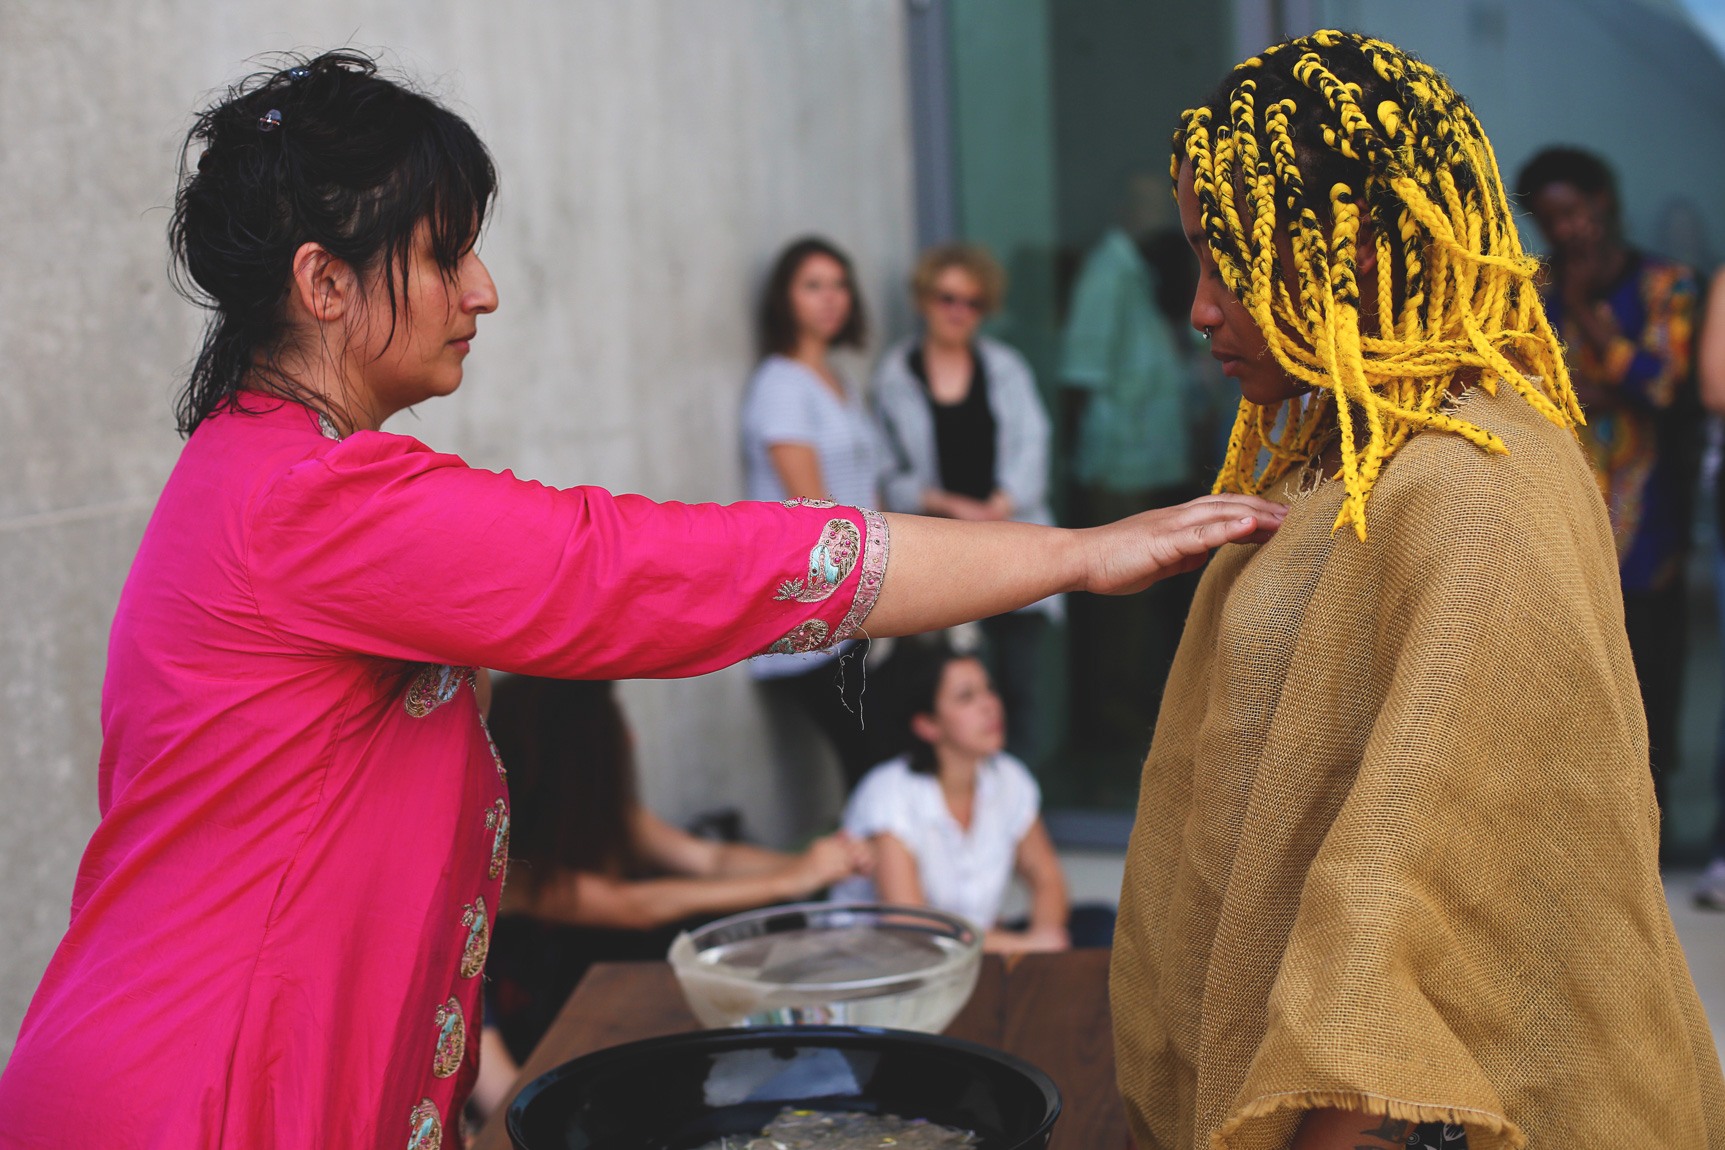 Bhanu Kapil performing a ritual with a participant, standing on either side of a table with bowls of water.